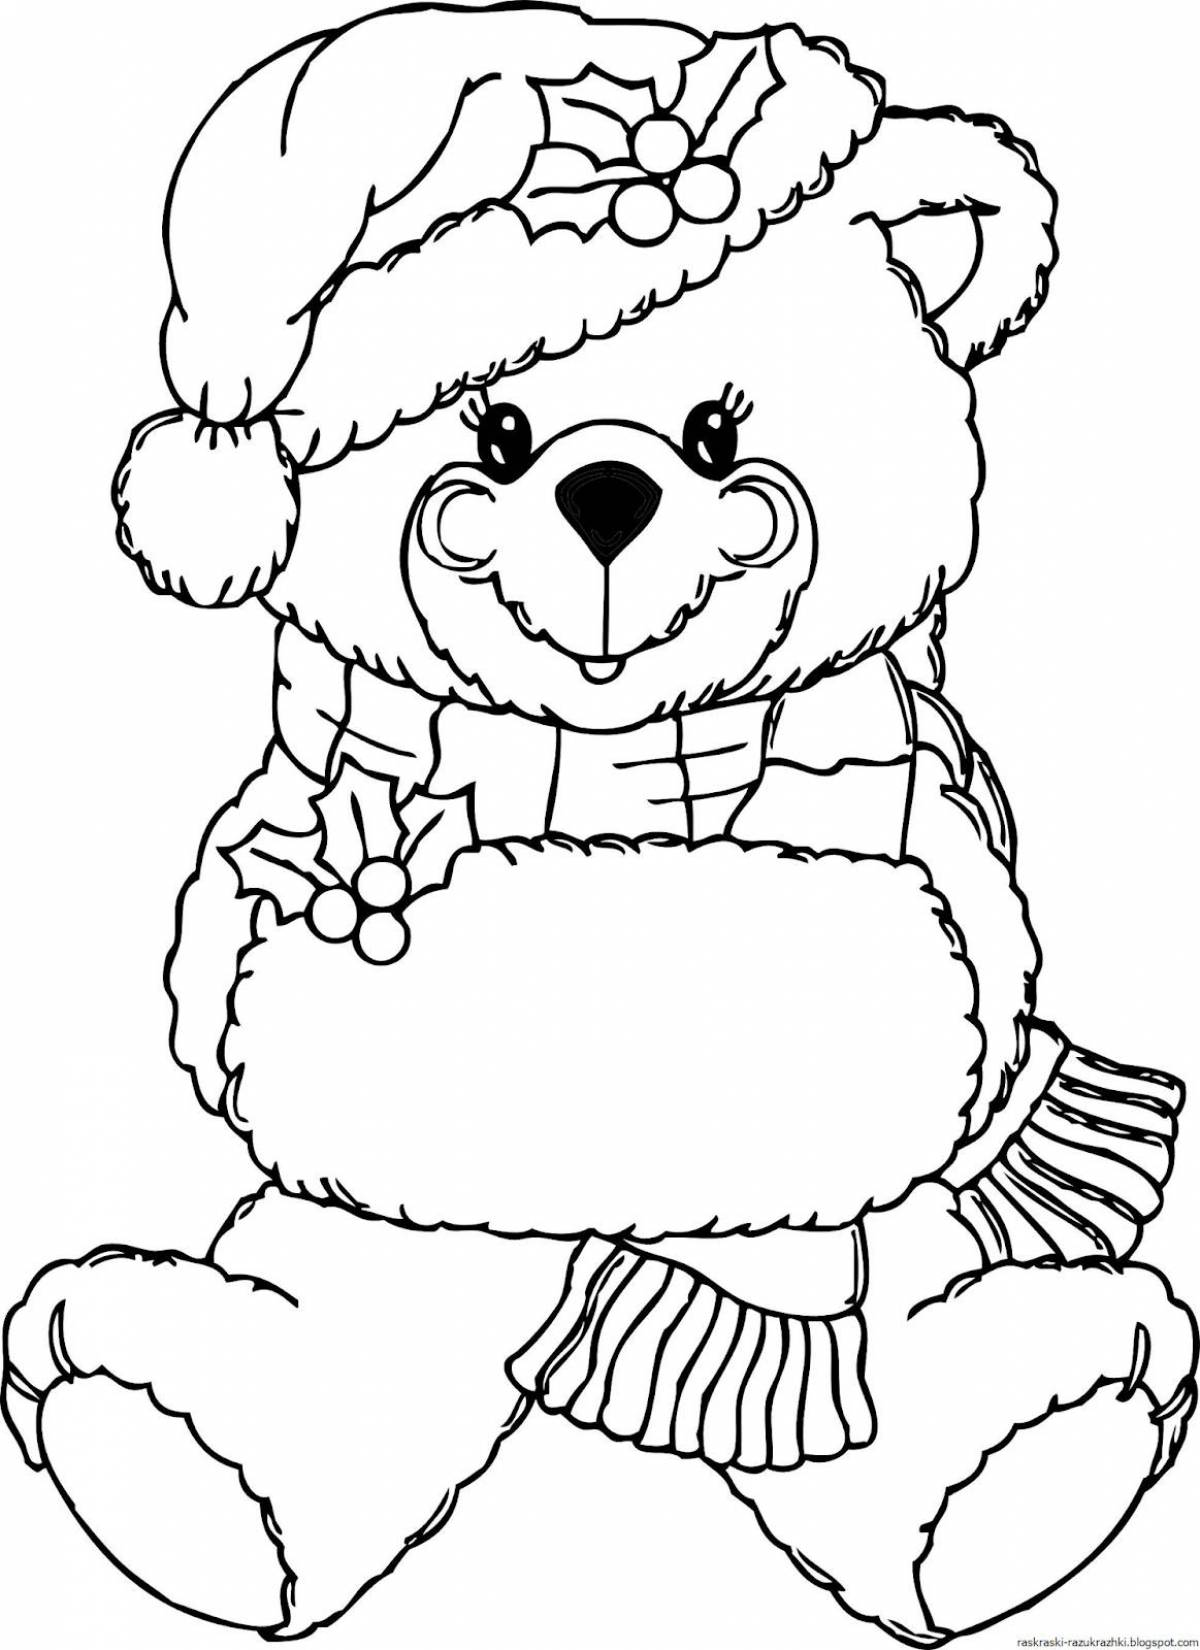 Coloring book frolicking teddy bear